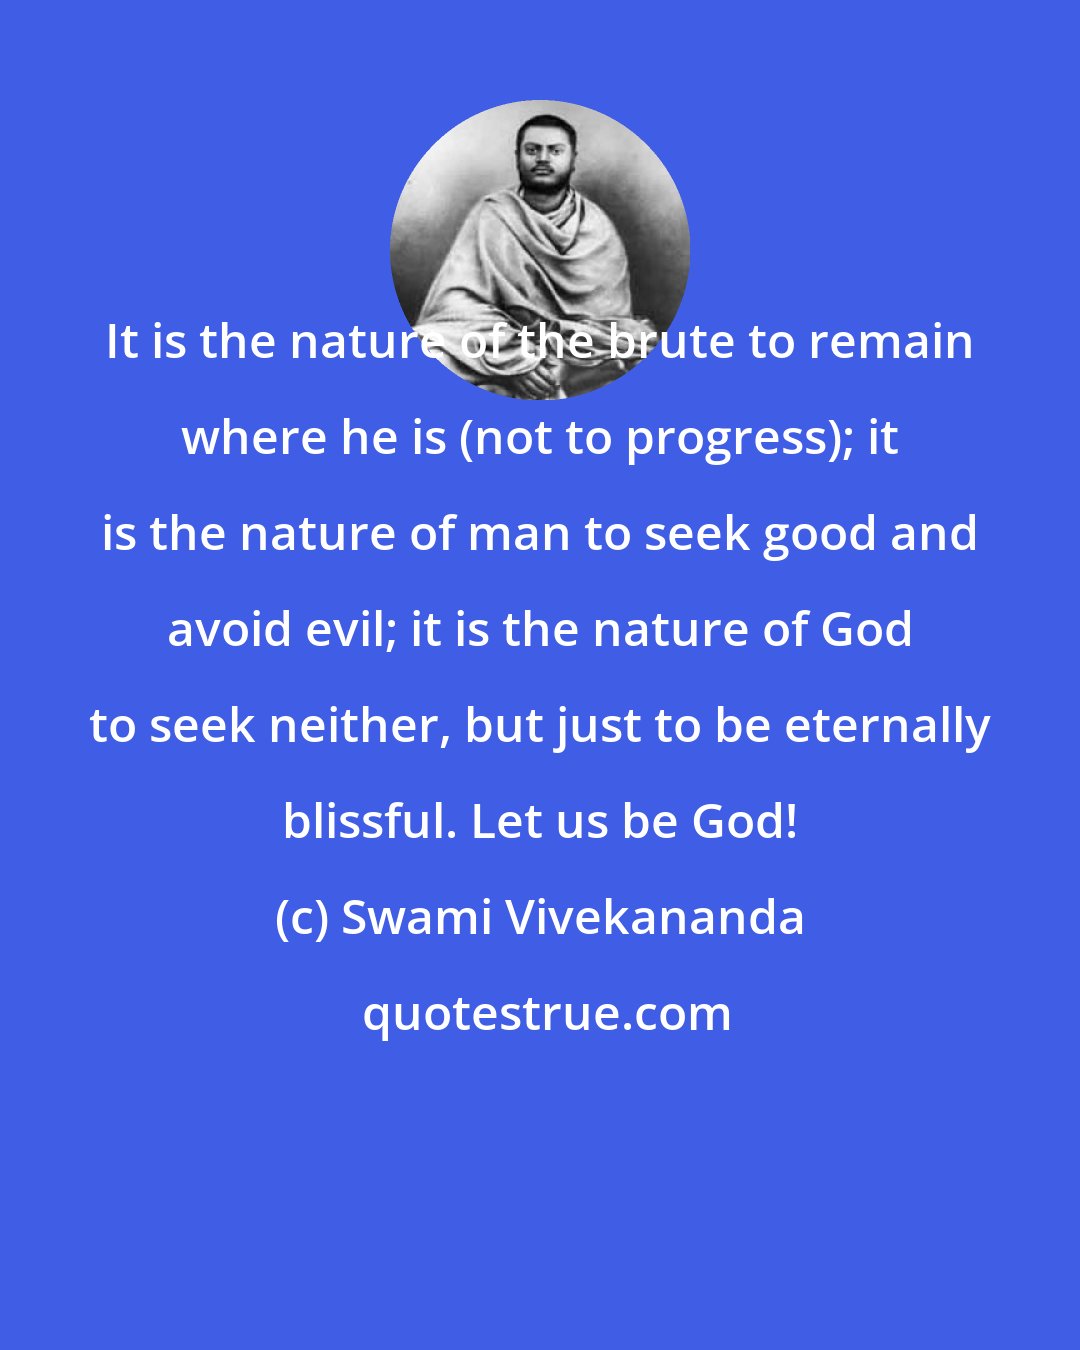 Swami Vivekananda: It is the nature of the brute to remain where he is (not to progress); it is the nature of man to seek good and avoid evil; it is the nature of God to seek neither, but just to be eternally blissful. Let us be God!